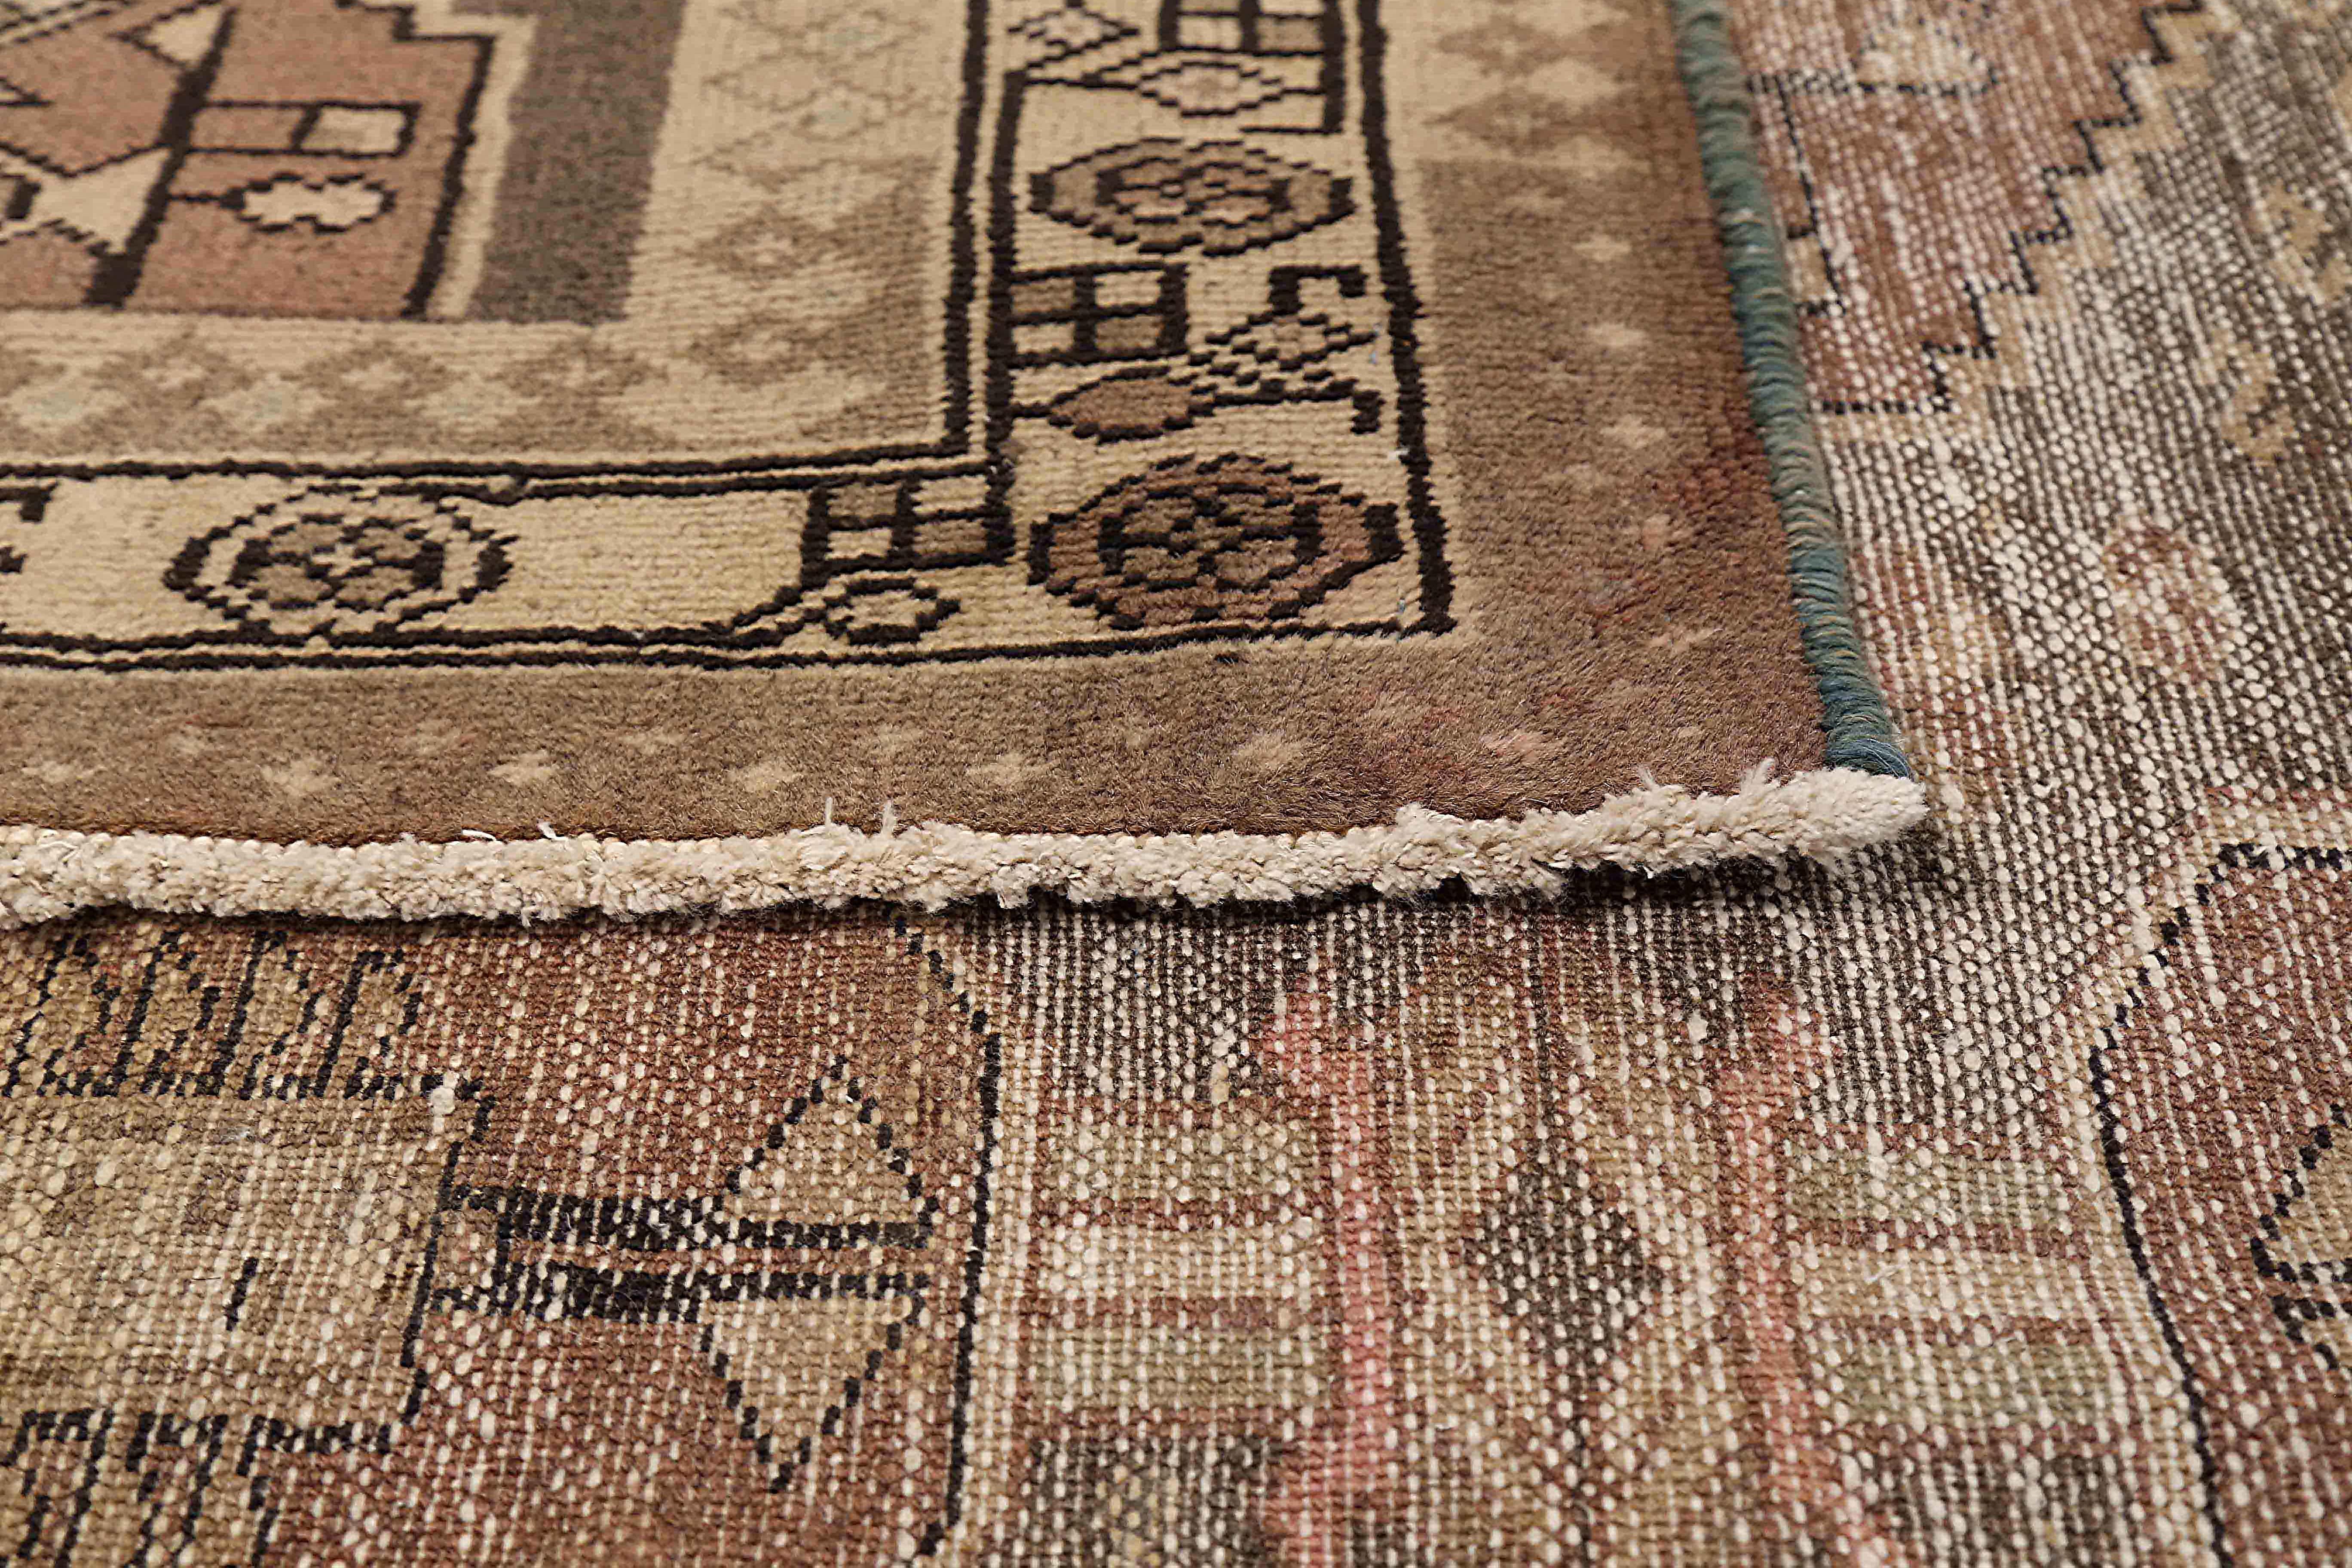 Antique Persian Malayer Rug with Brown & Black Tribal Medallions on Beige Field In Excellent Condition For Sale In Dallas, TX